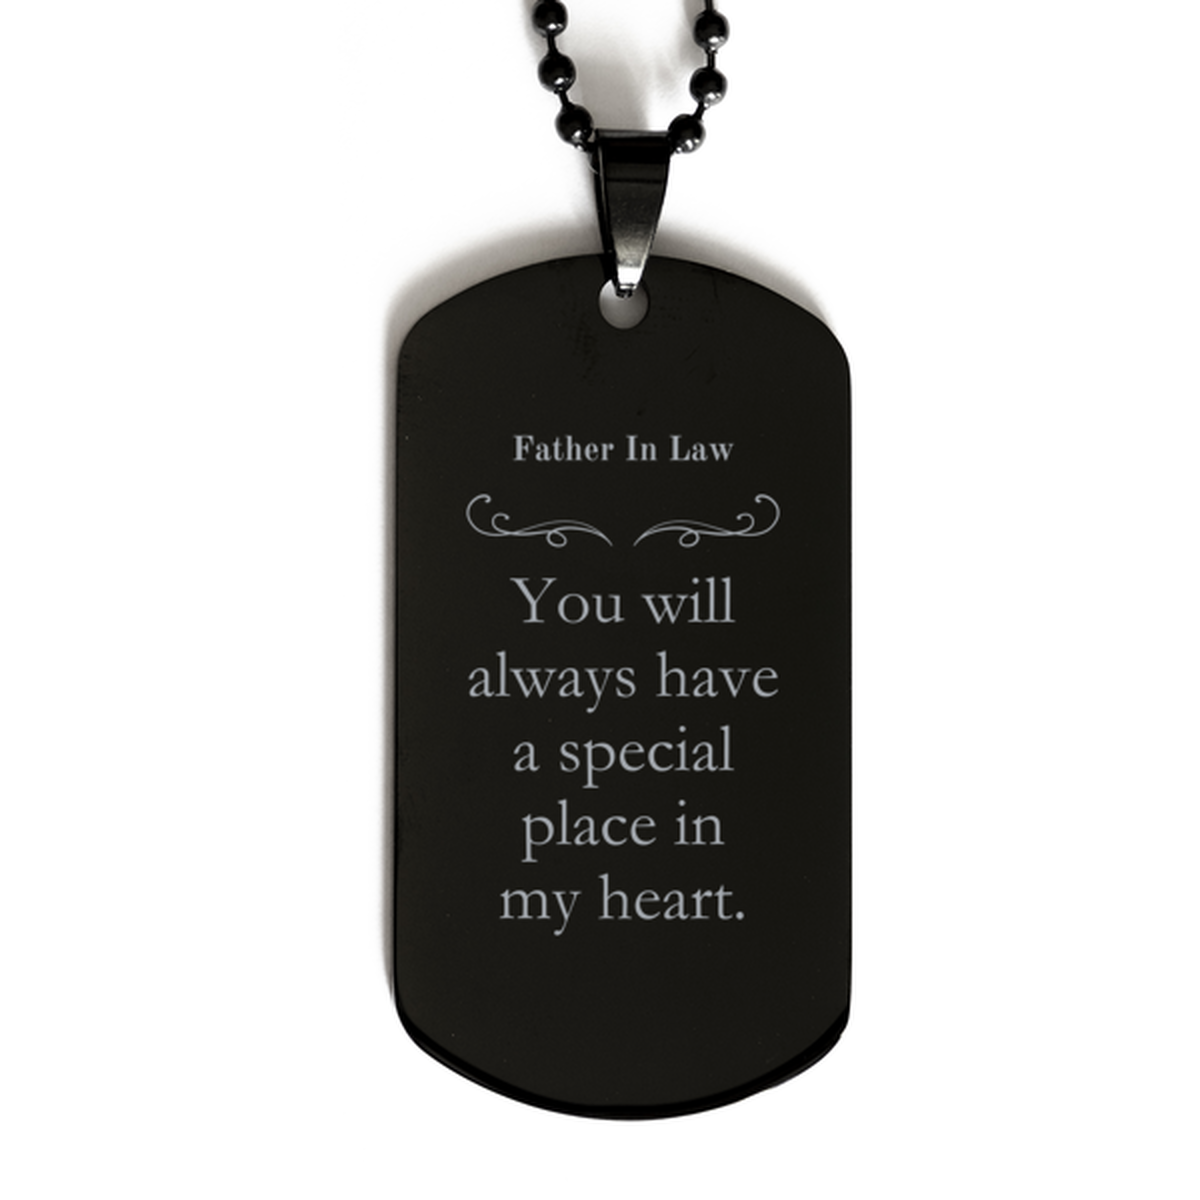 Engraved Black Dog Tag Father In Law Gift You Will Always Have a Special Place in My Heart for Birthday Christmas and Graduation Occasions Unique and Inspirational Memento for Veterans Day and Easter Celebrations